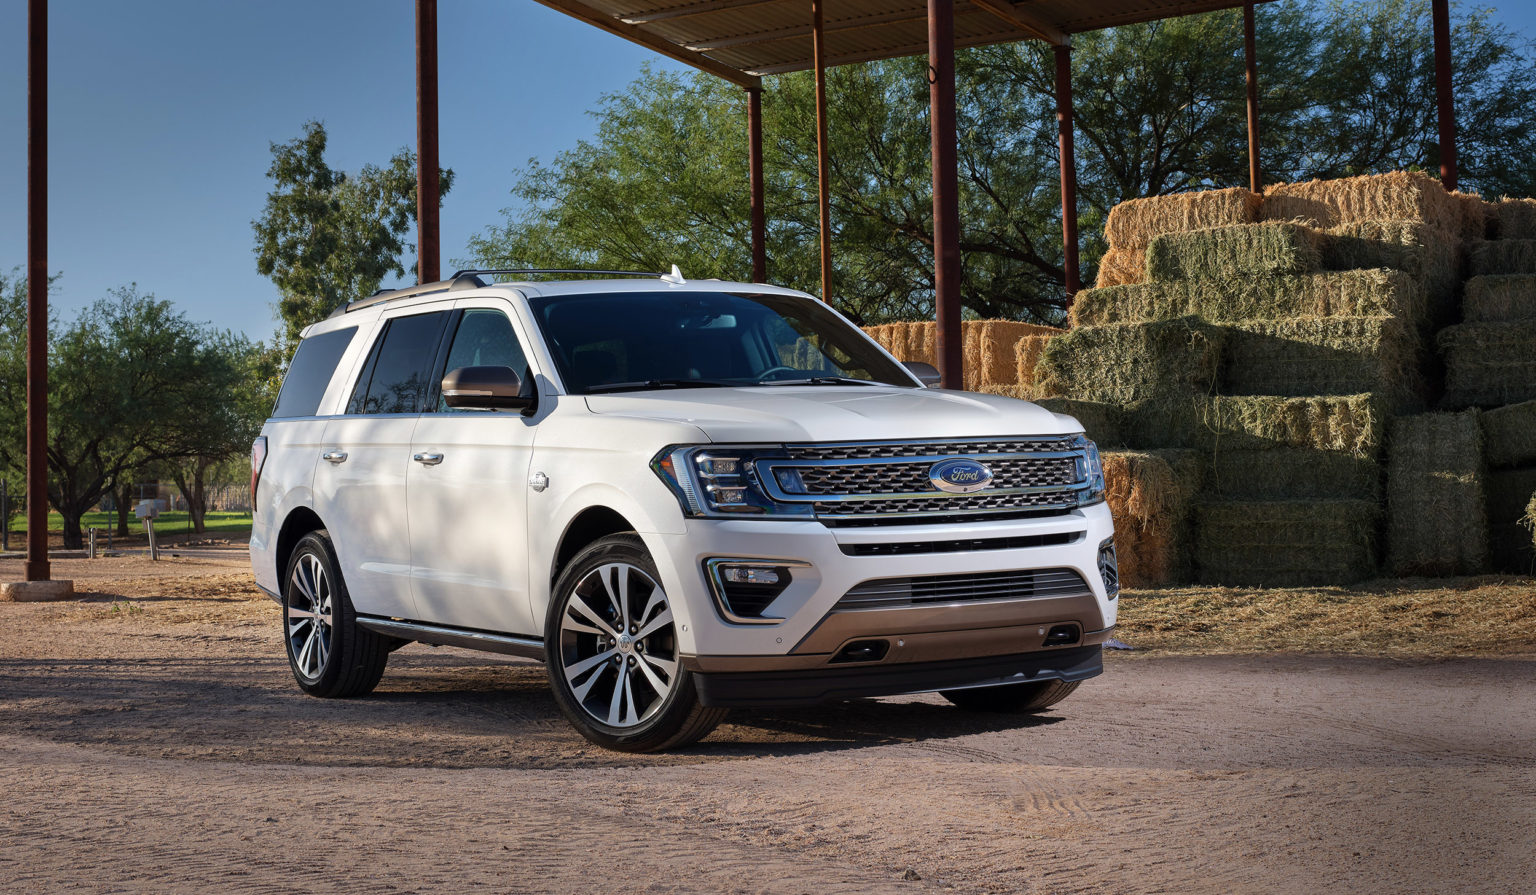 Ford has cowboy up with the new Expedition King Ranch and Platinum for 2020.